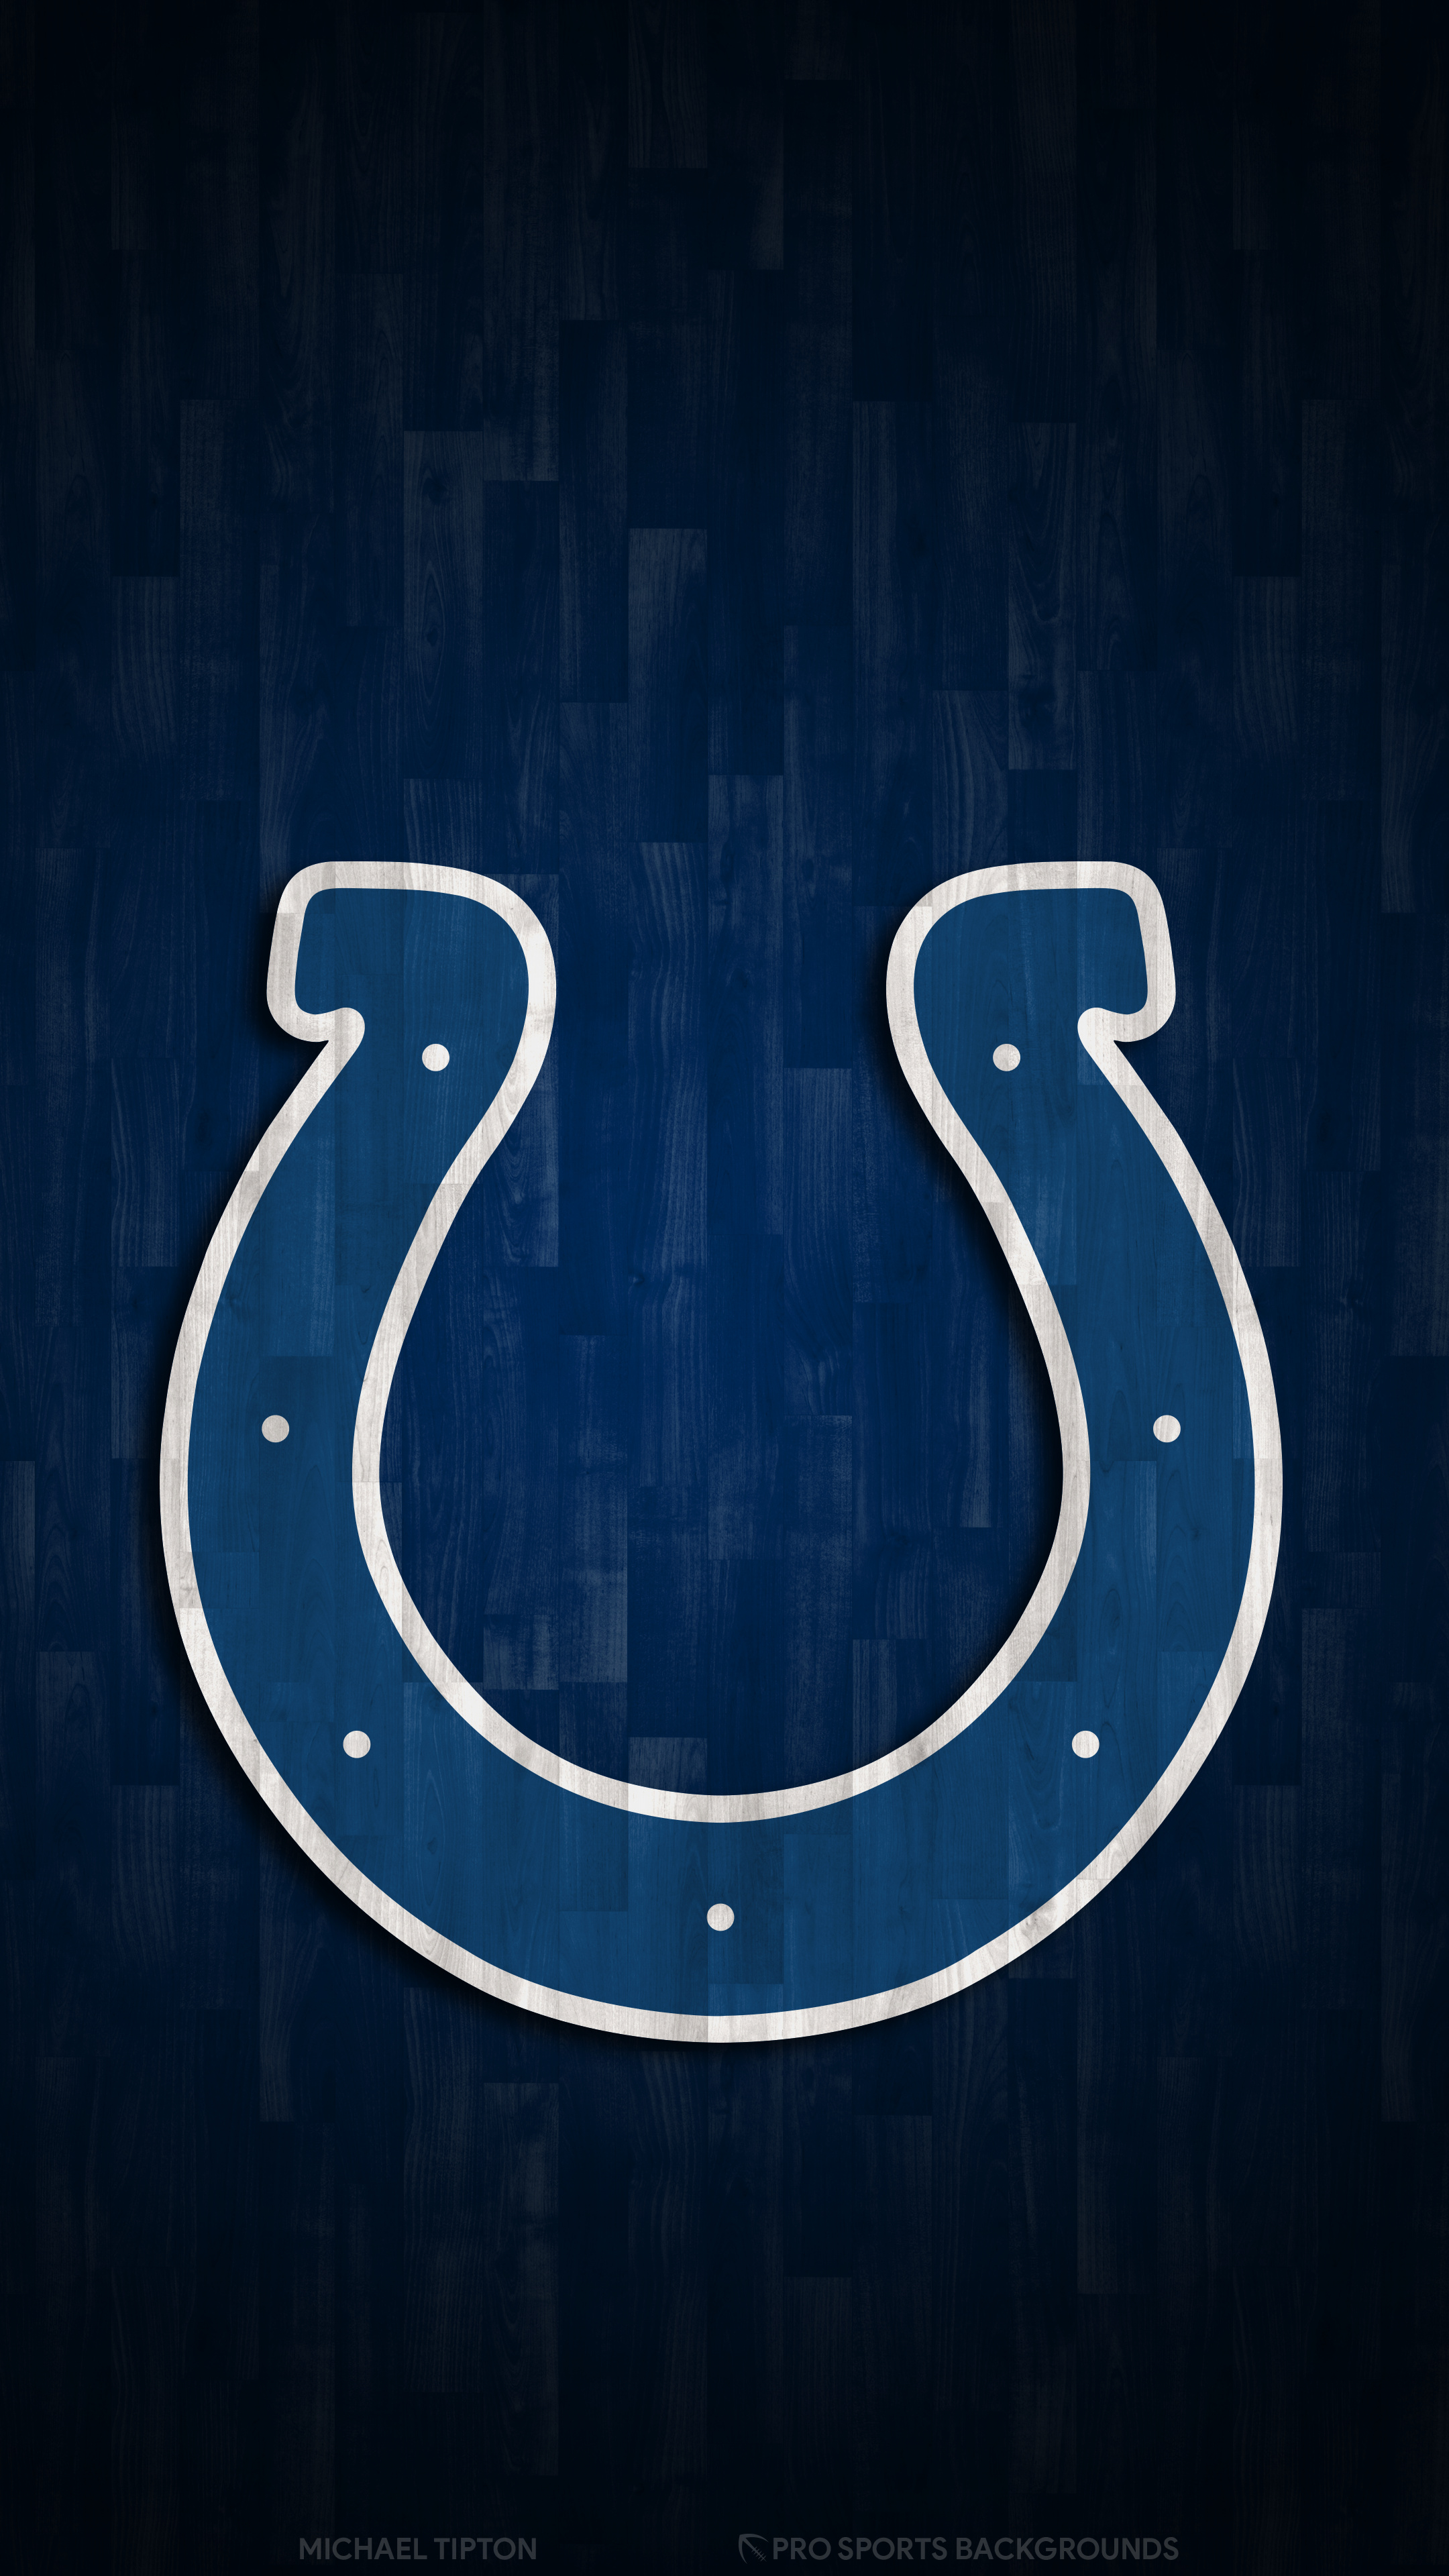 HD wallpaper, Desktop Mobile Tablet, Pro Sports, Iphone 4K Indianapolis Colts Wallpaper, Colts, 2019 Indianapolis Colts, 2160X3840 4K Phone